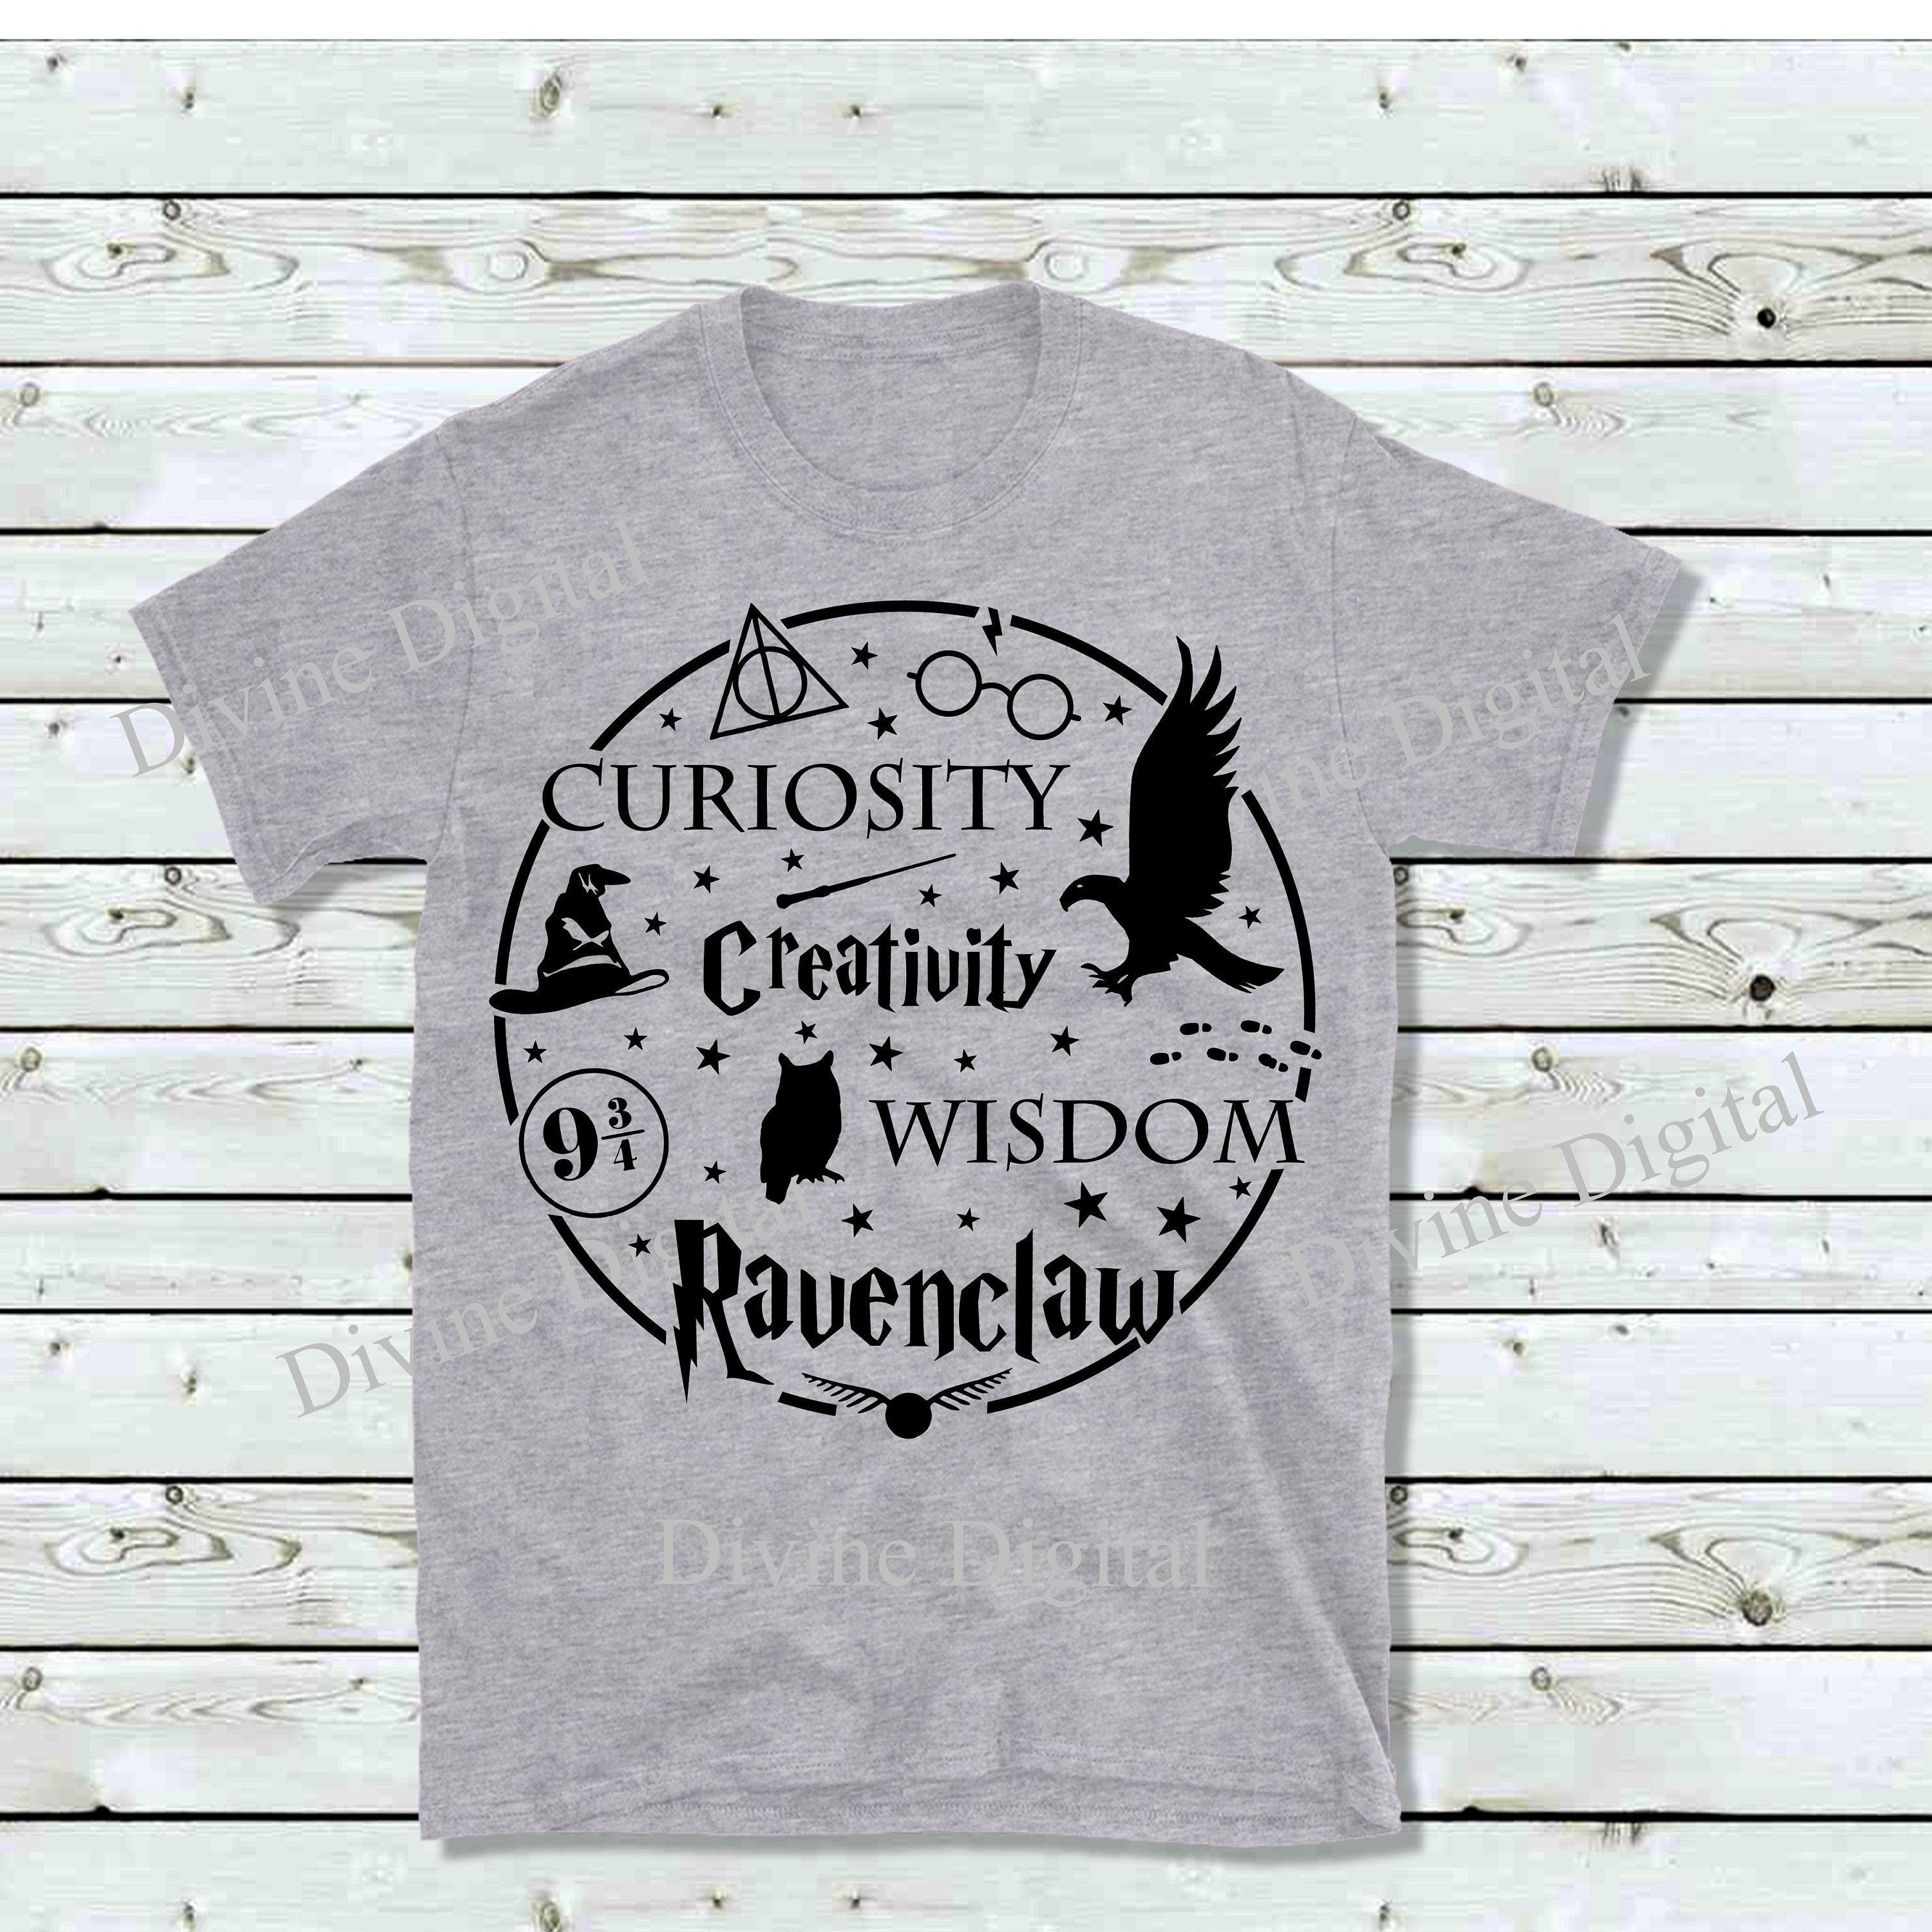 Ravenclaw HP Houses Word Bubble Shirt SVG File for Vinyl Cutting Machines  Silhouette Cricut Brother Scan N Cut - Etsy Sweden